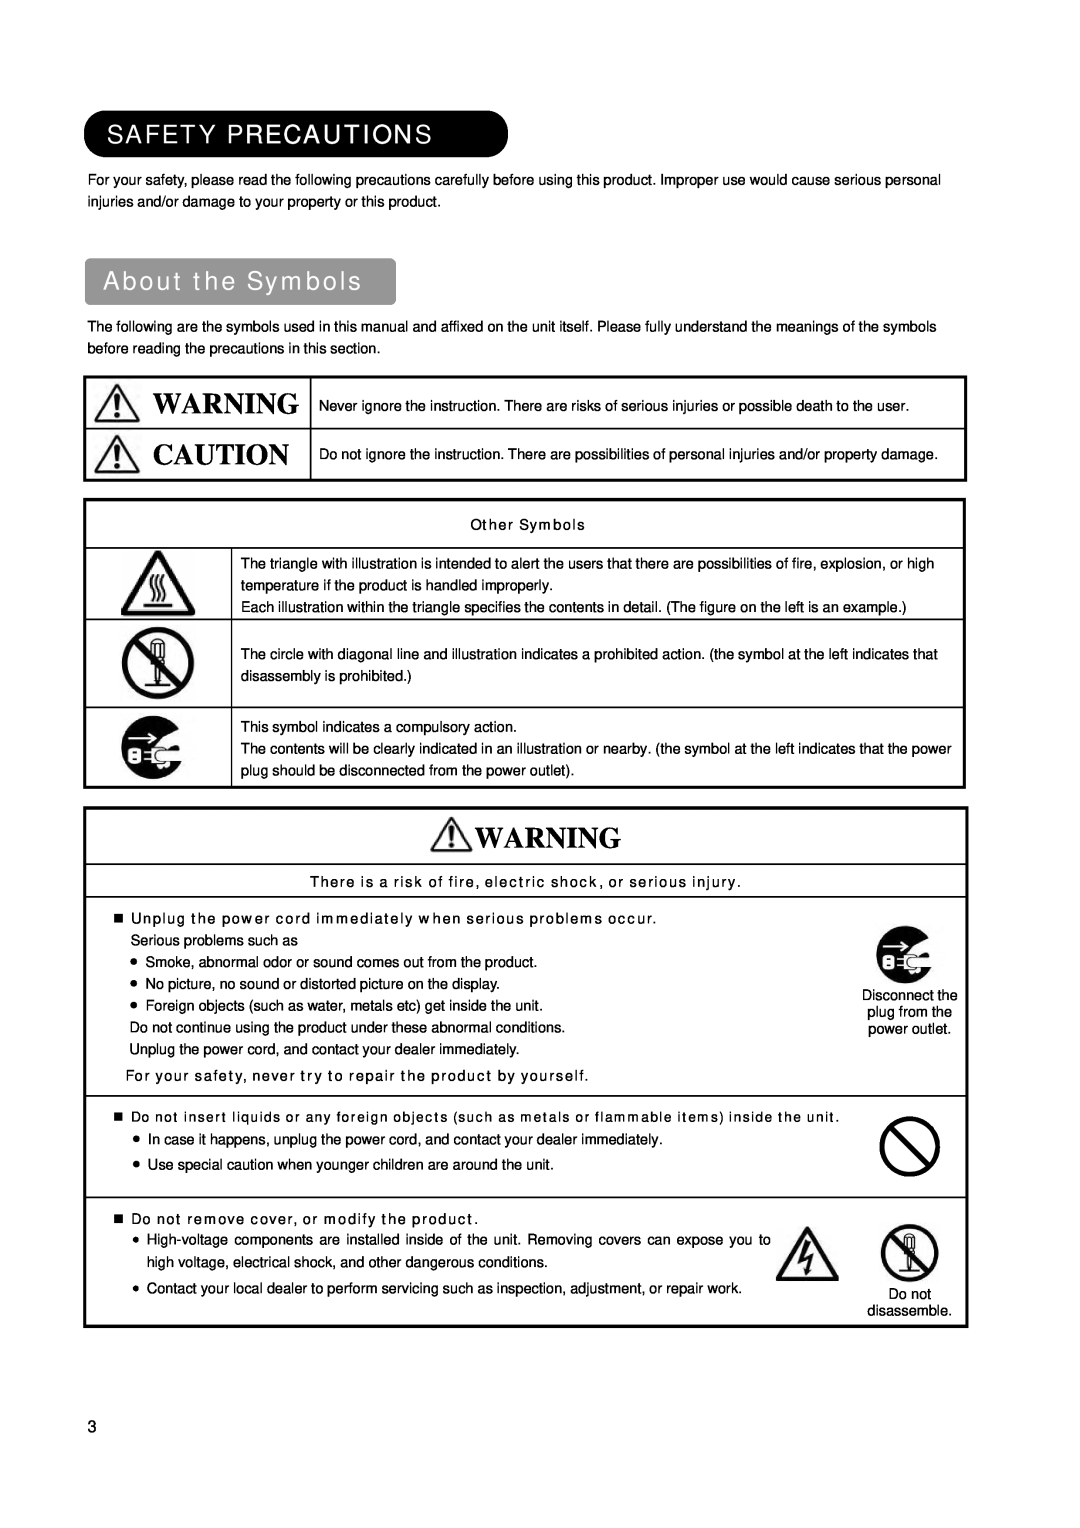 Hitachi L37X01AU manual Safety Precautions, About the Symbols, Other Symbols, „ Do not remove cover, or modify the product 